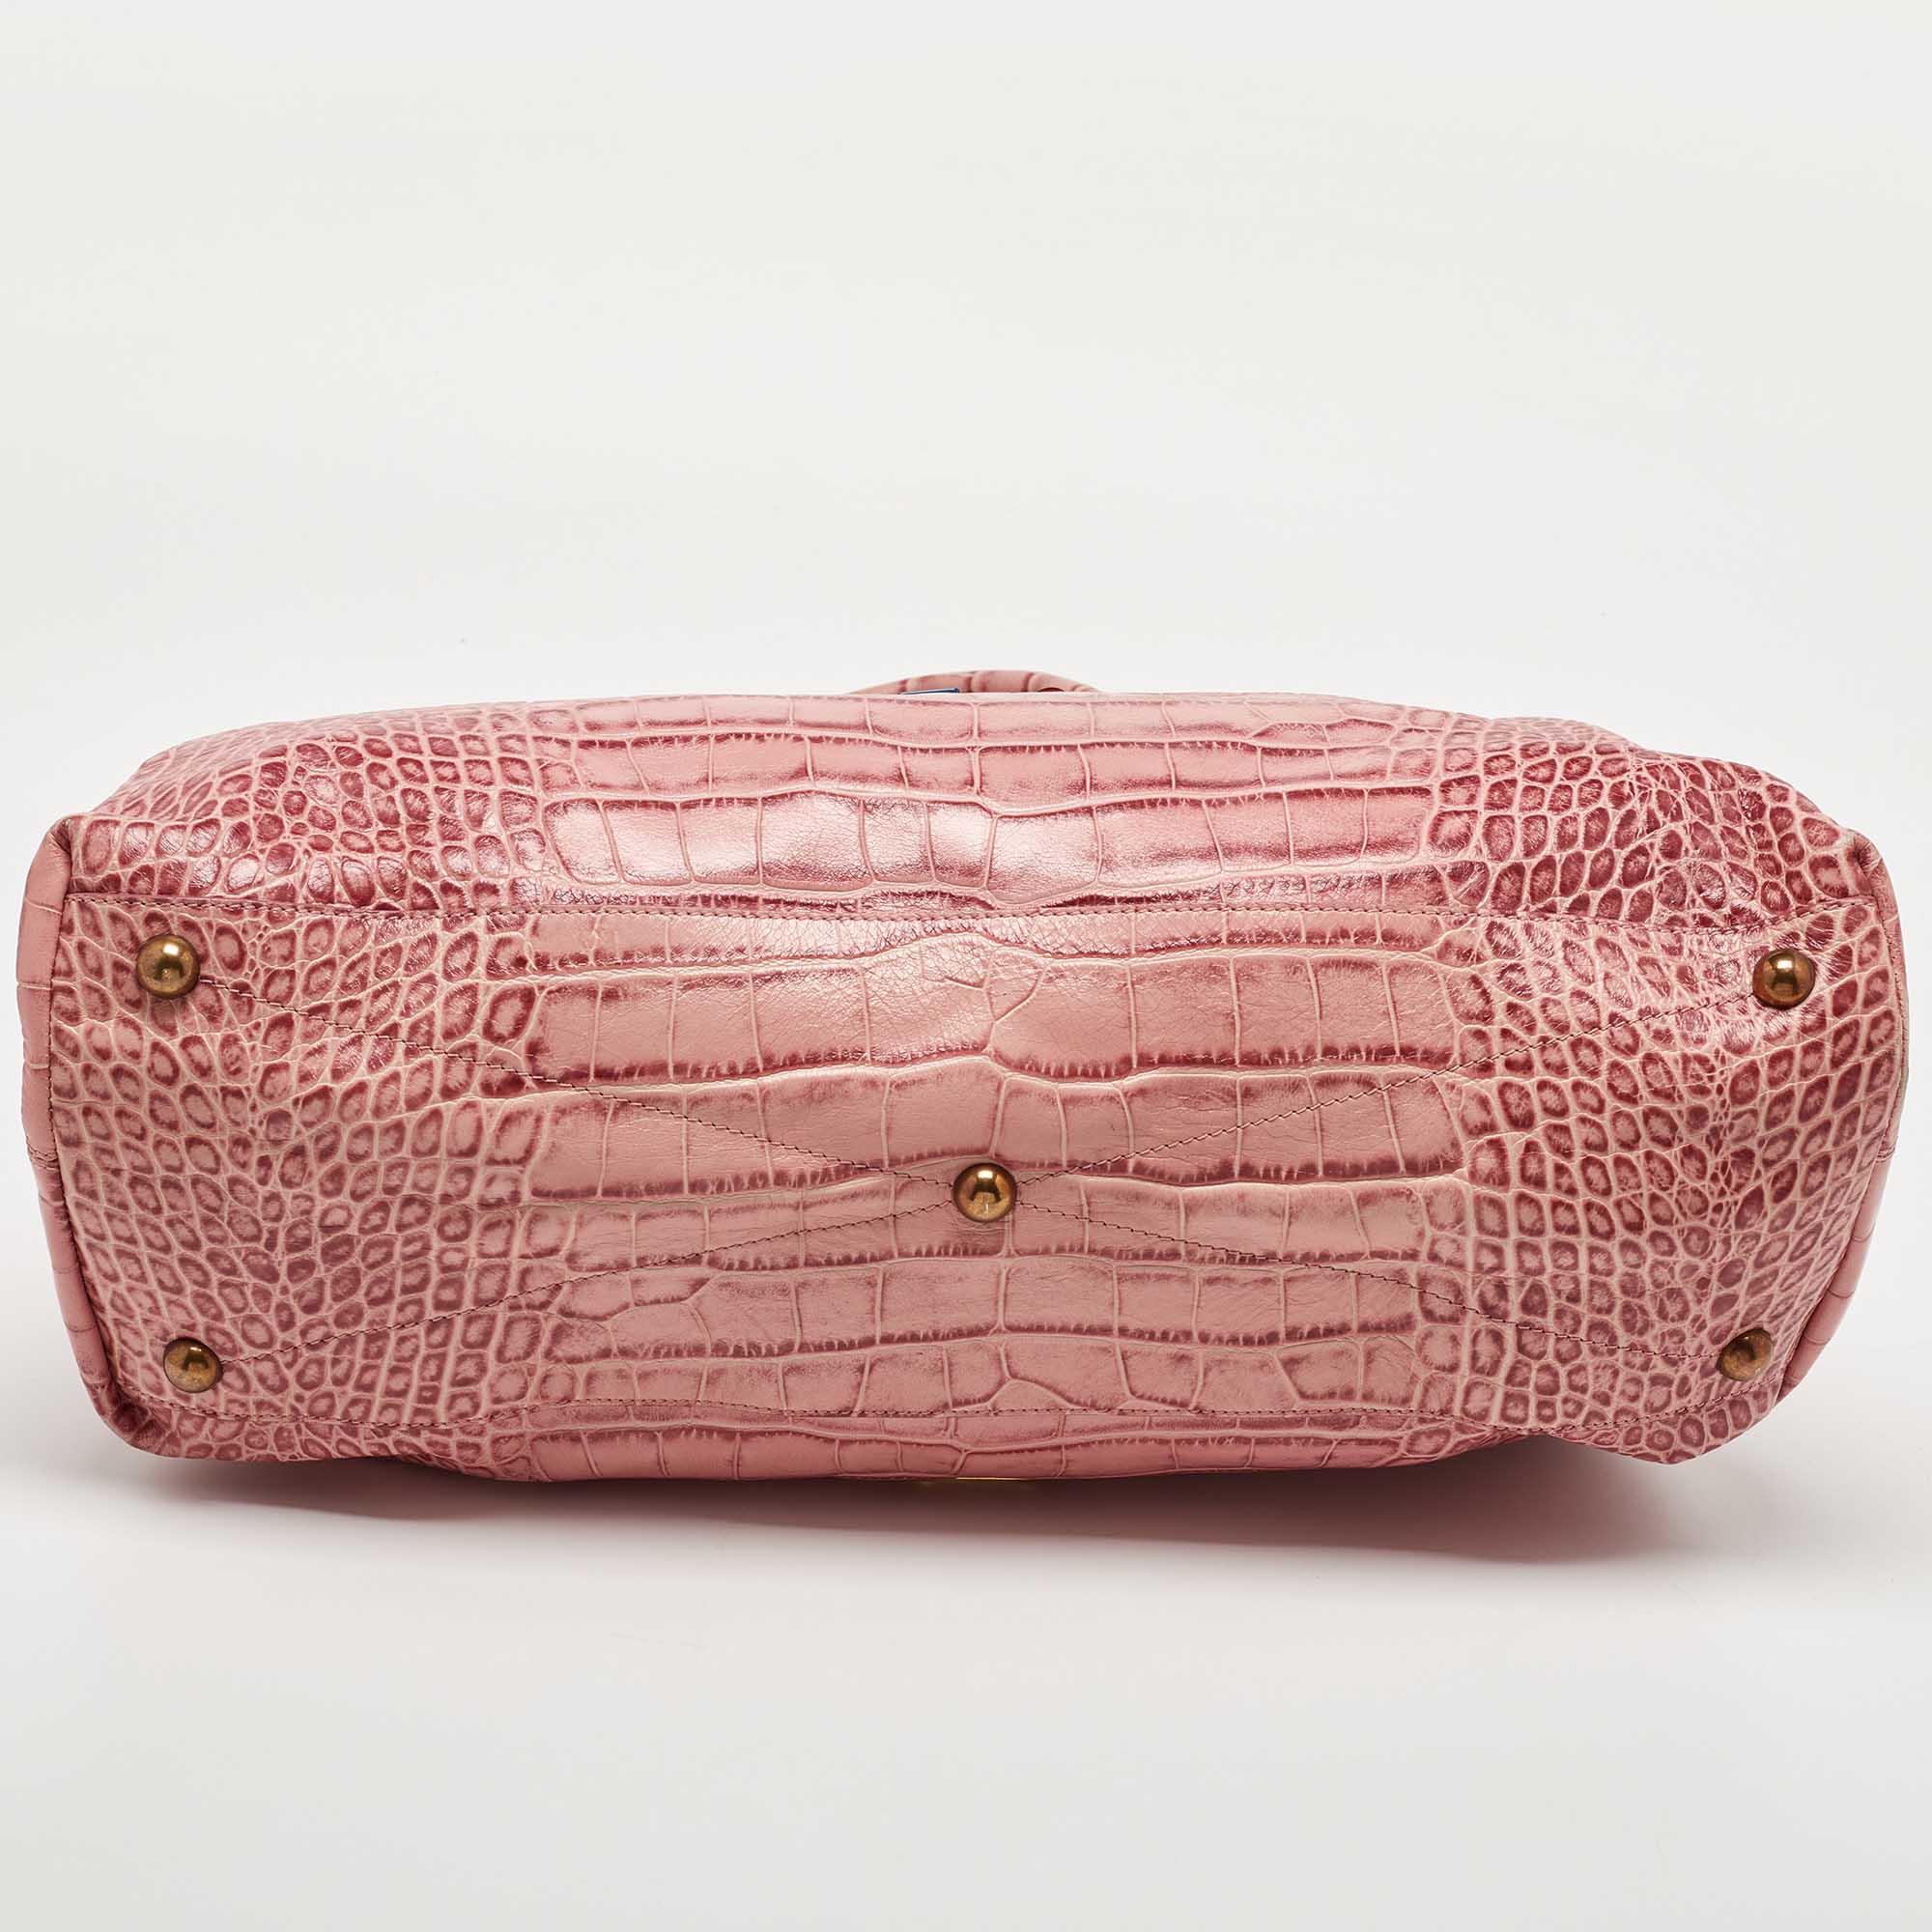 Moschino Pink Croc Embossed Leather Bow Flap Bag